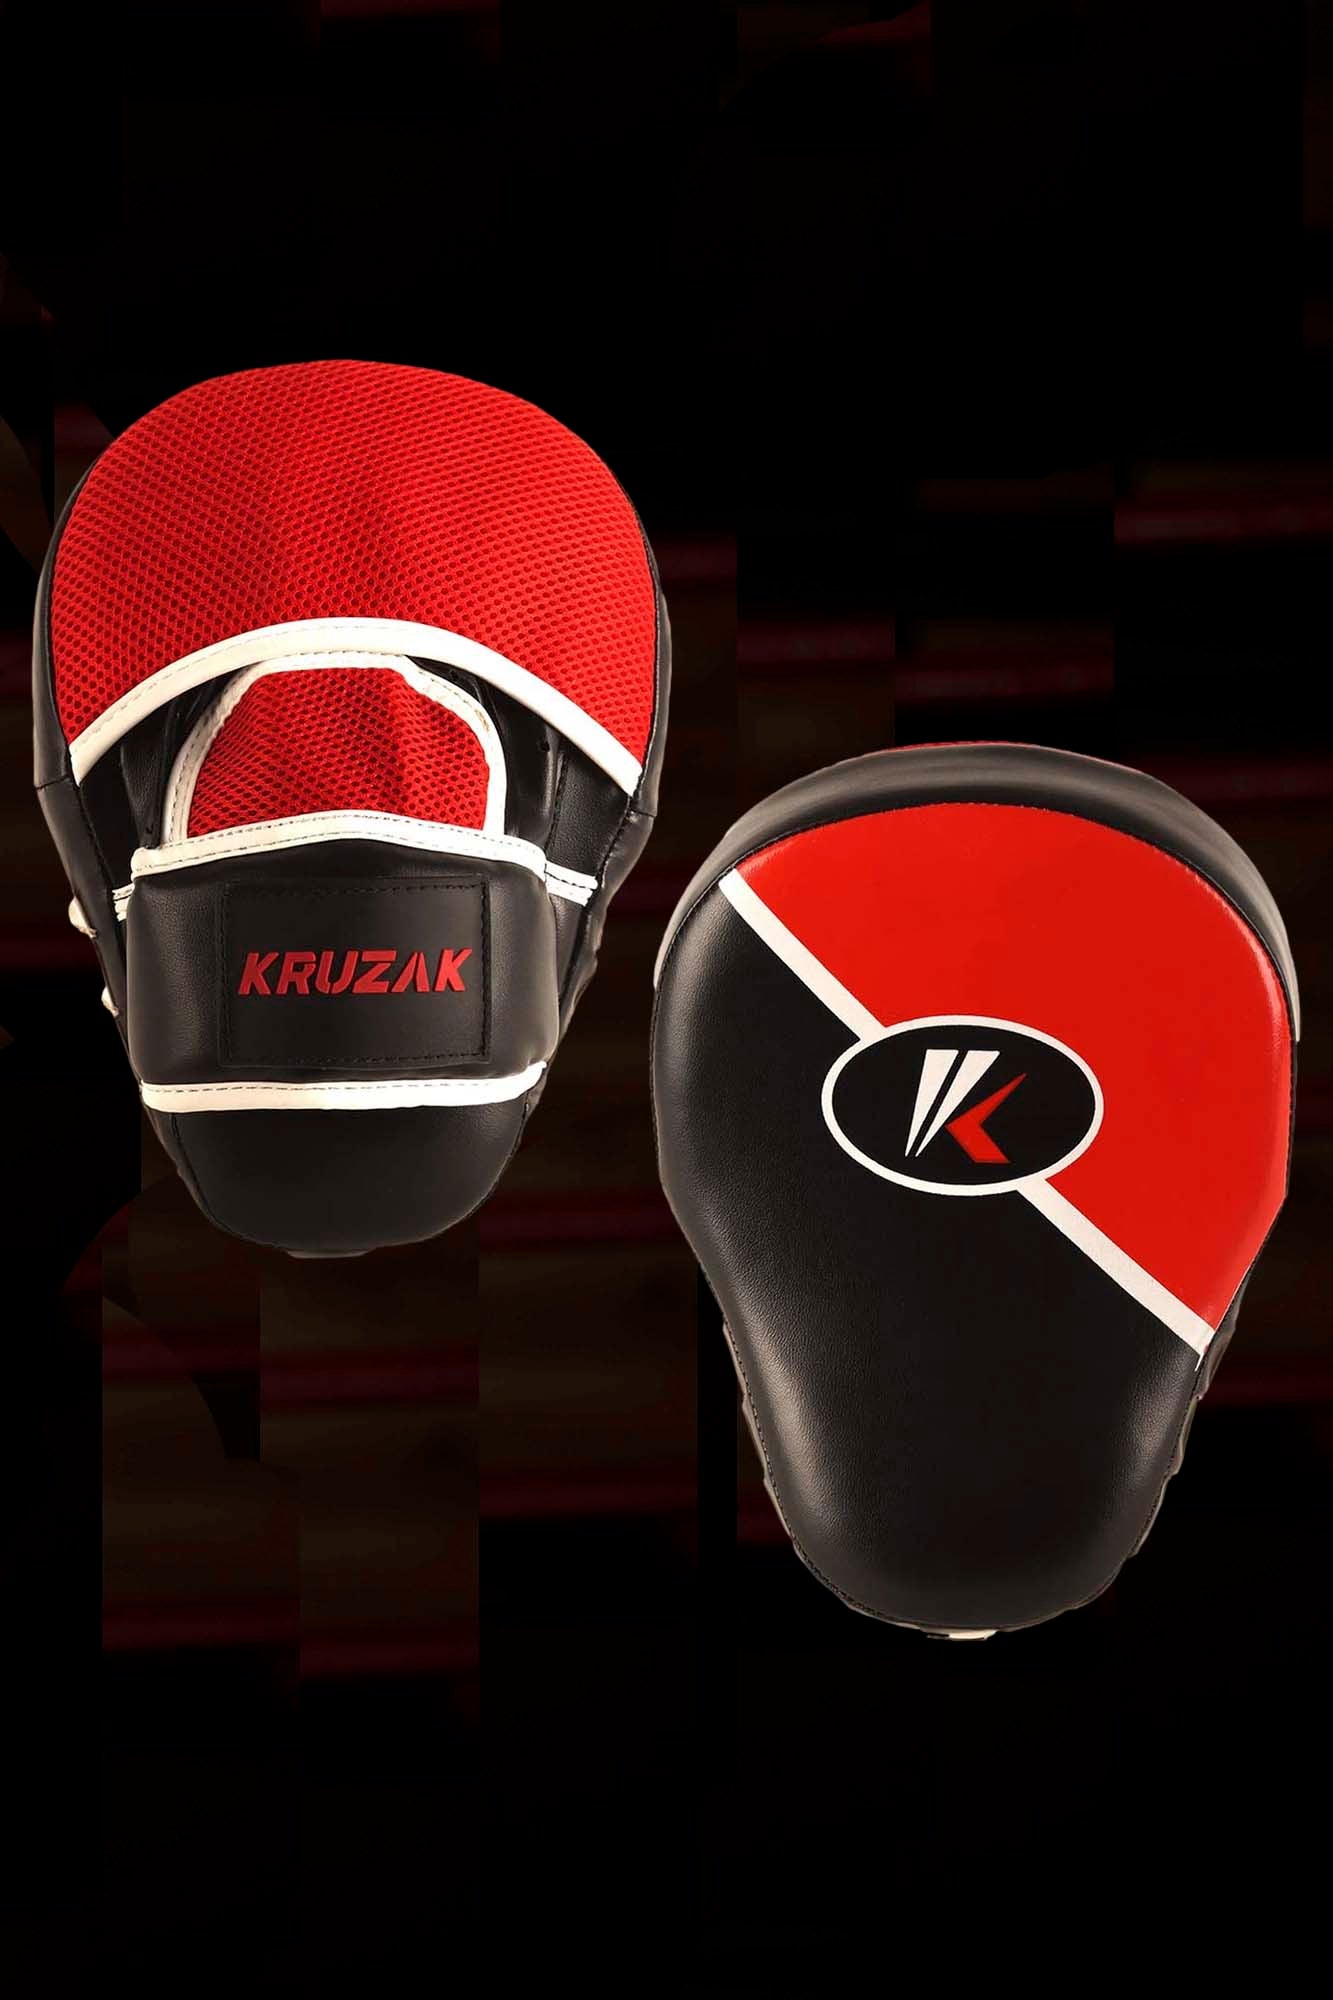 Premium Black-Red Training Gloves & Focus Mitts Set for Boxing, Muay Thai, Kick Boxing & MMA Fighting